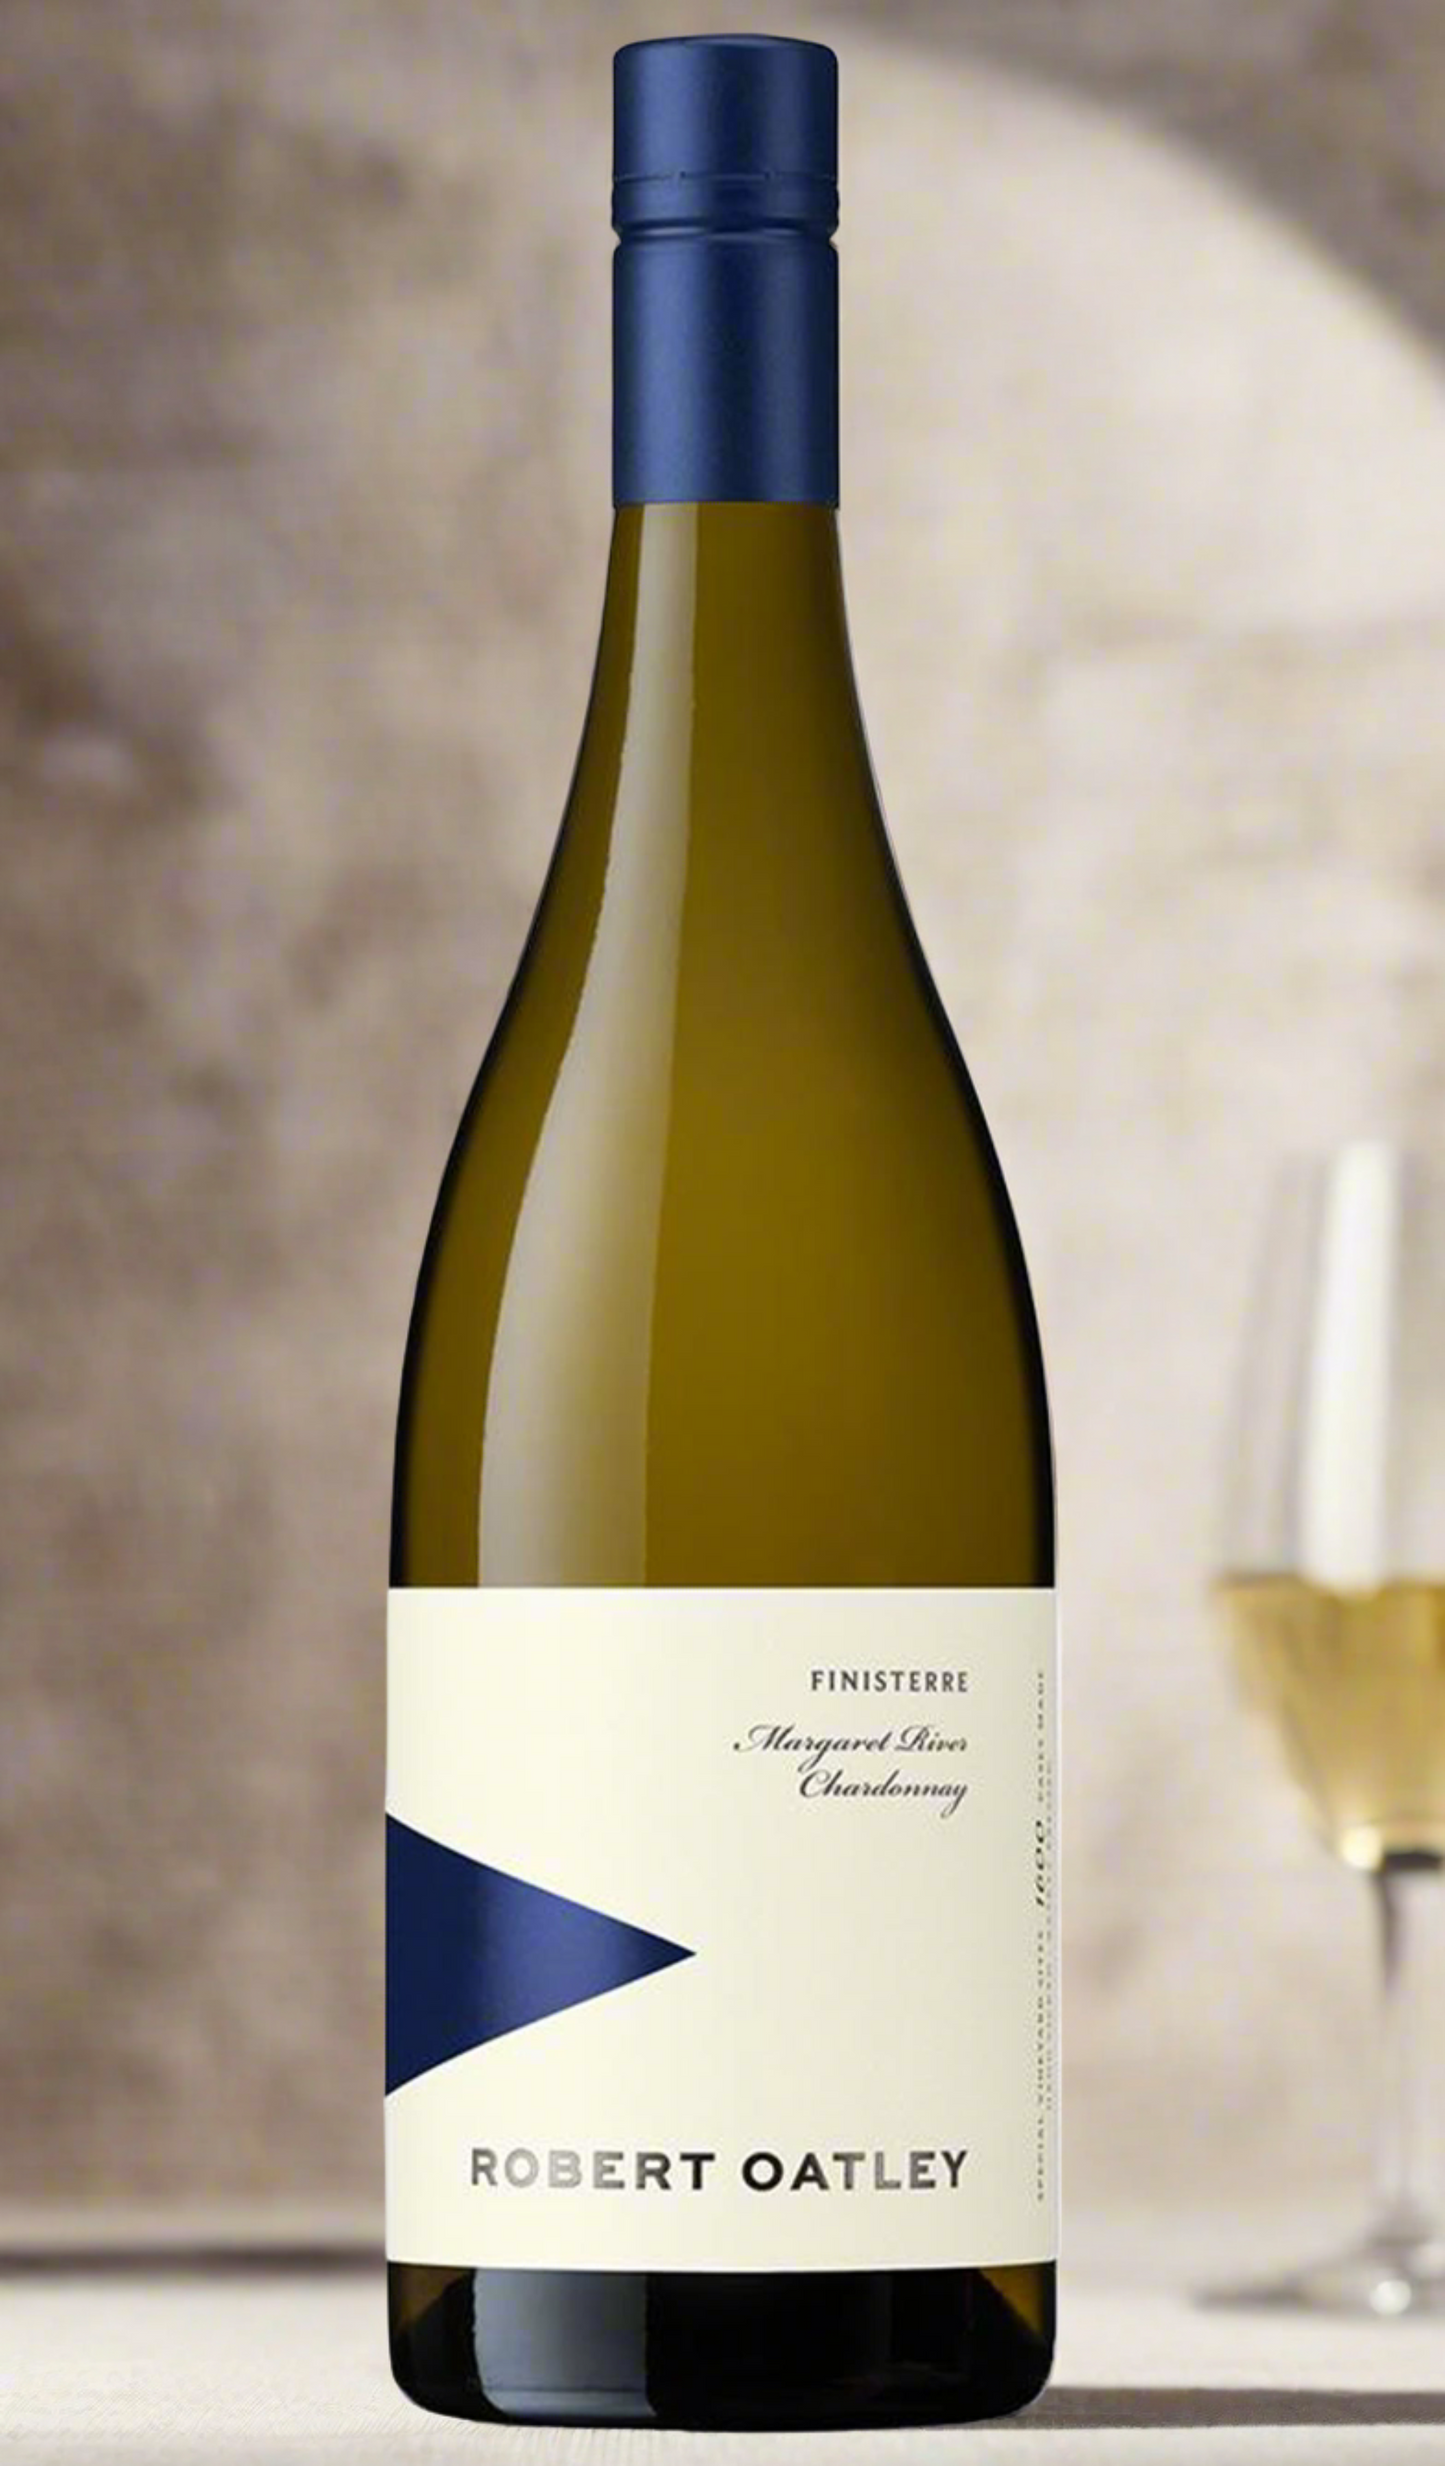 Find out more, explore the range and buy Robert Oatley Finisterre Chardonnay 2021 (Margaret River) available online at Wine Sellers Direct - Australia's independent liquor specialists.